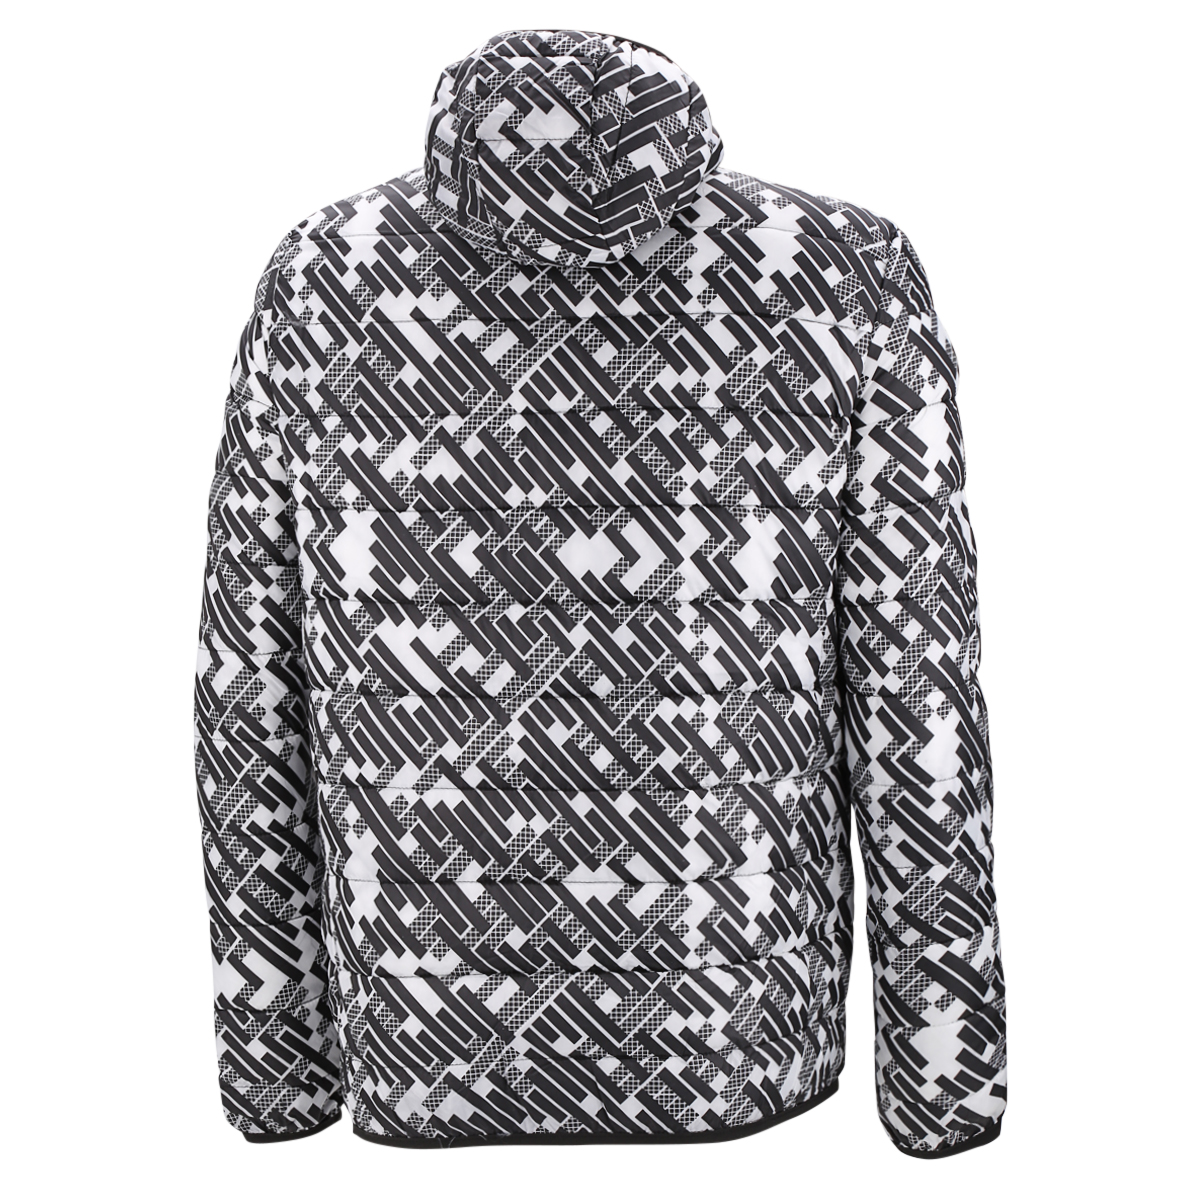 Campera Lotto Print Dinamico,  image number null